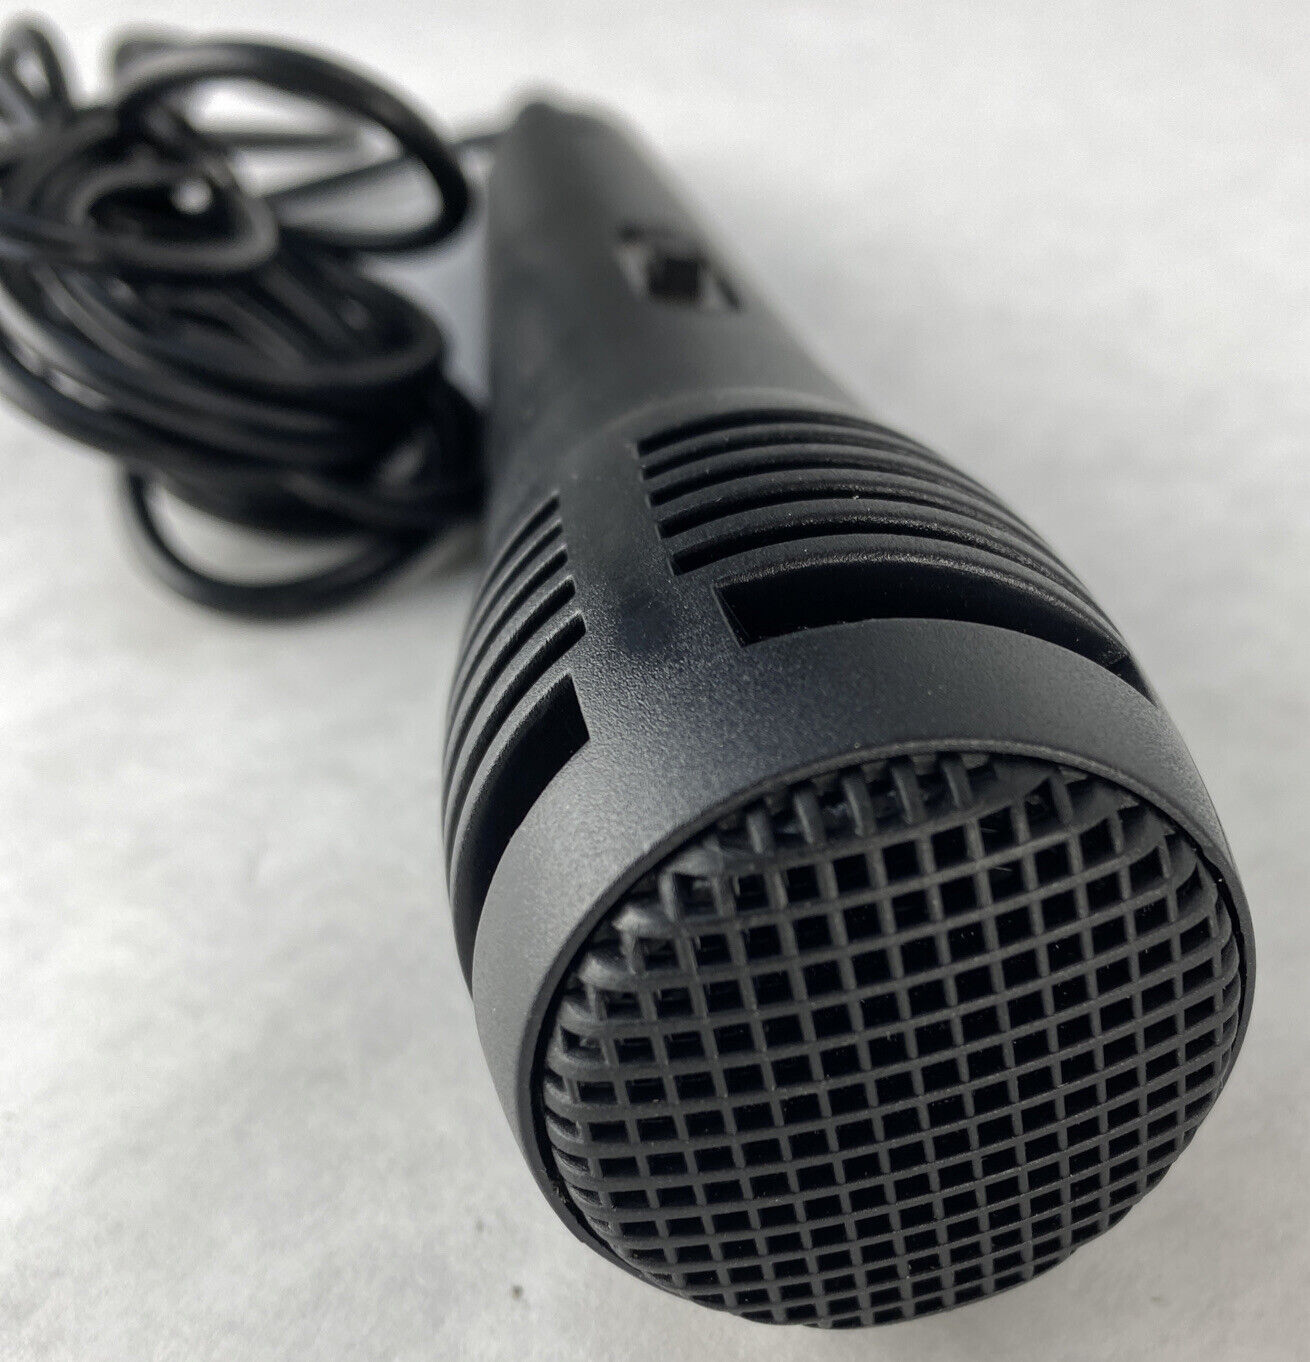 Altec Lansing Dynamic Microphone UNTESTED